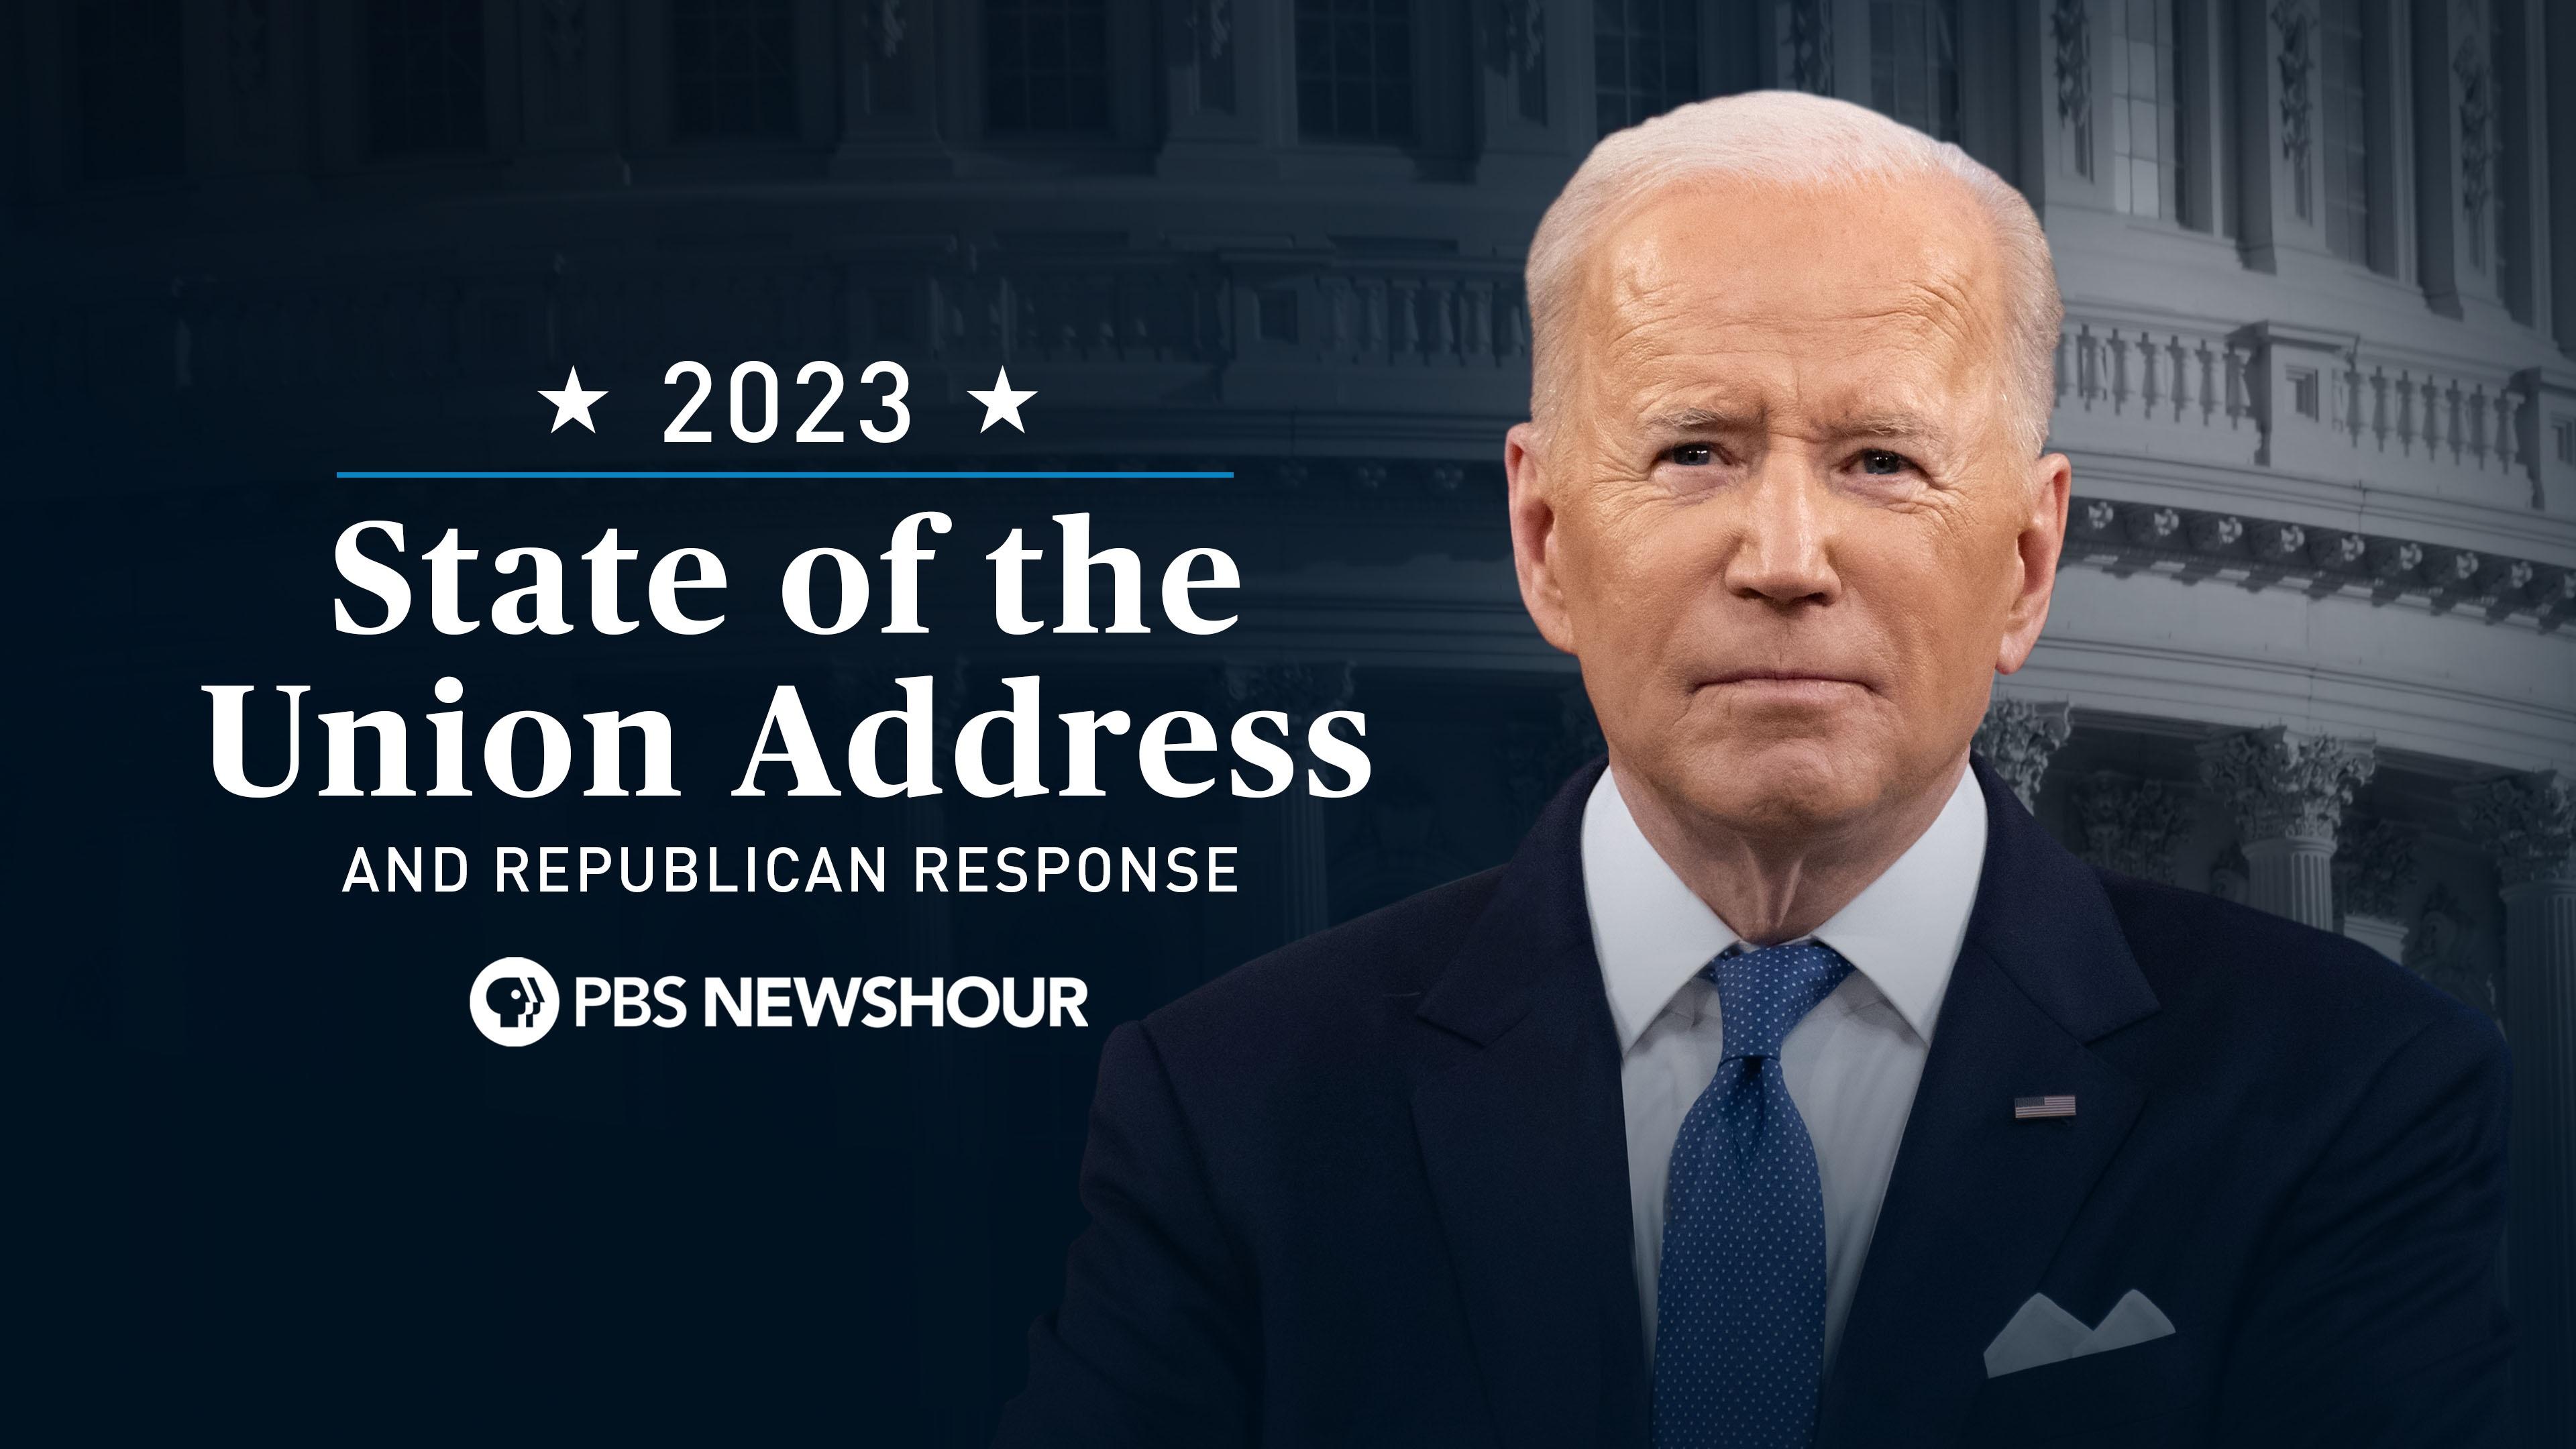 a picture of President Biden with "2023 State of the Union Address and Republican Response PBS NewsHour"